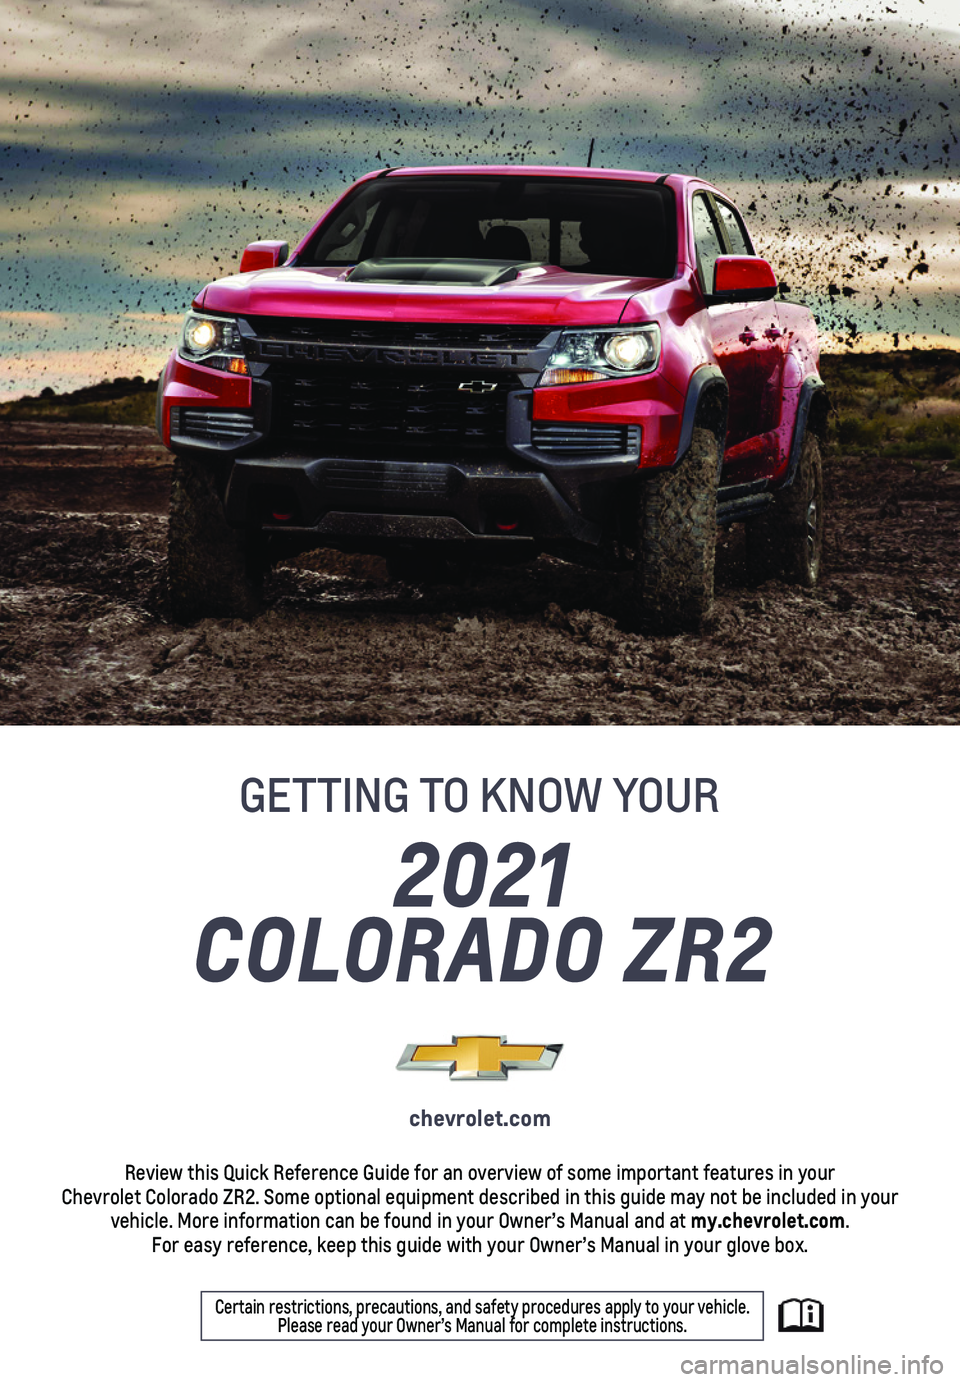 CHEVROLET COLORADO 2021  Get To Know Guide ZR2 1
2021
COLORADO ZR2
GETTING TO KNOW YOUR
chevrolet.com
Review this Quick Reference Guide for an overview of some important feat\
ures in your  Chevrolet Colorado ZR2. Some optional equipment described